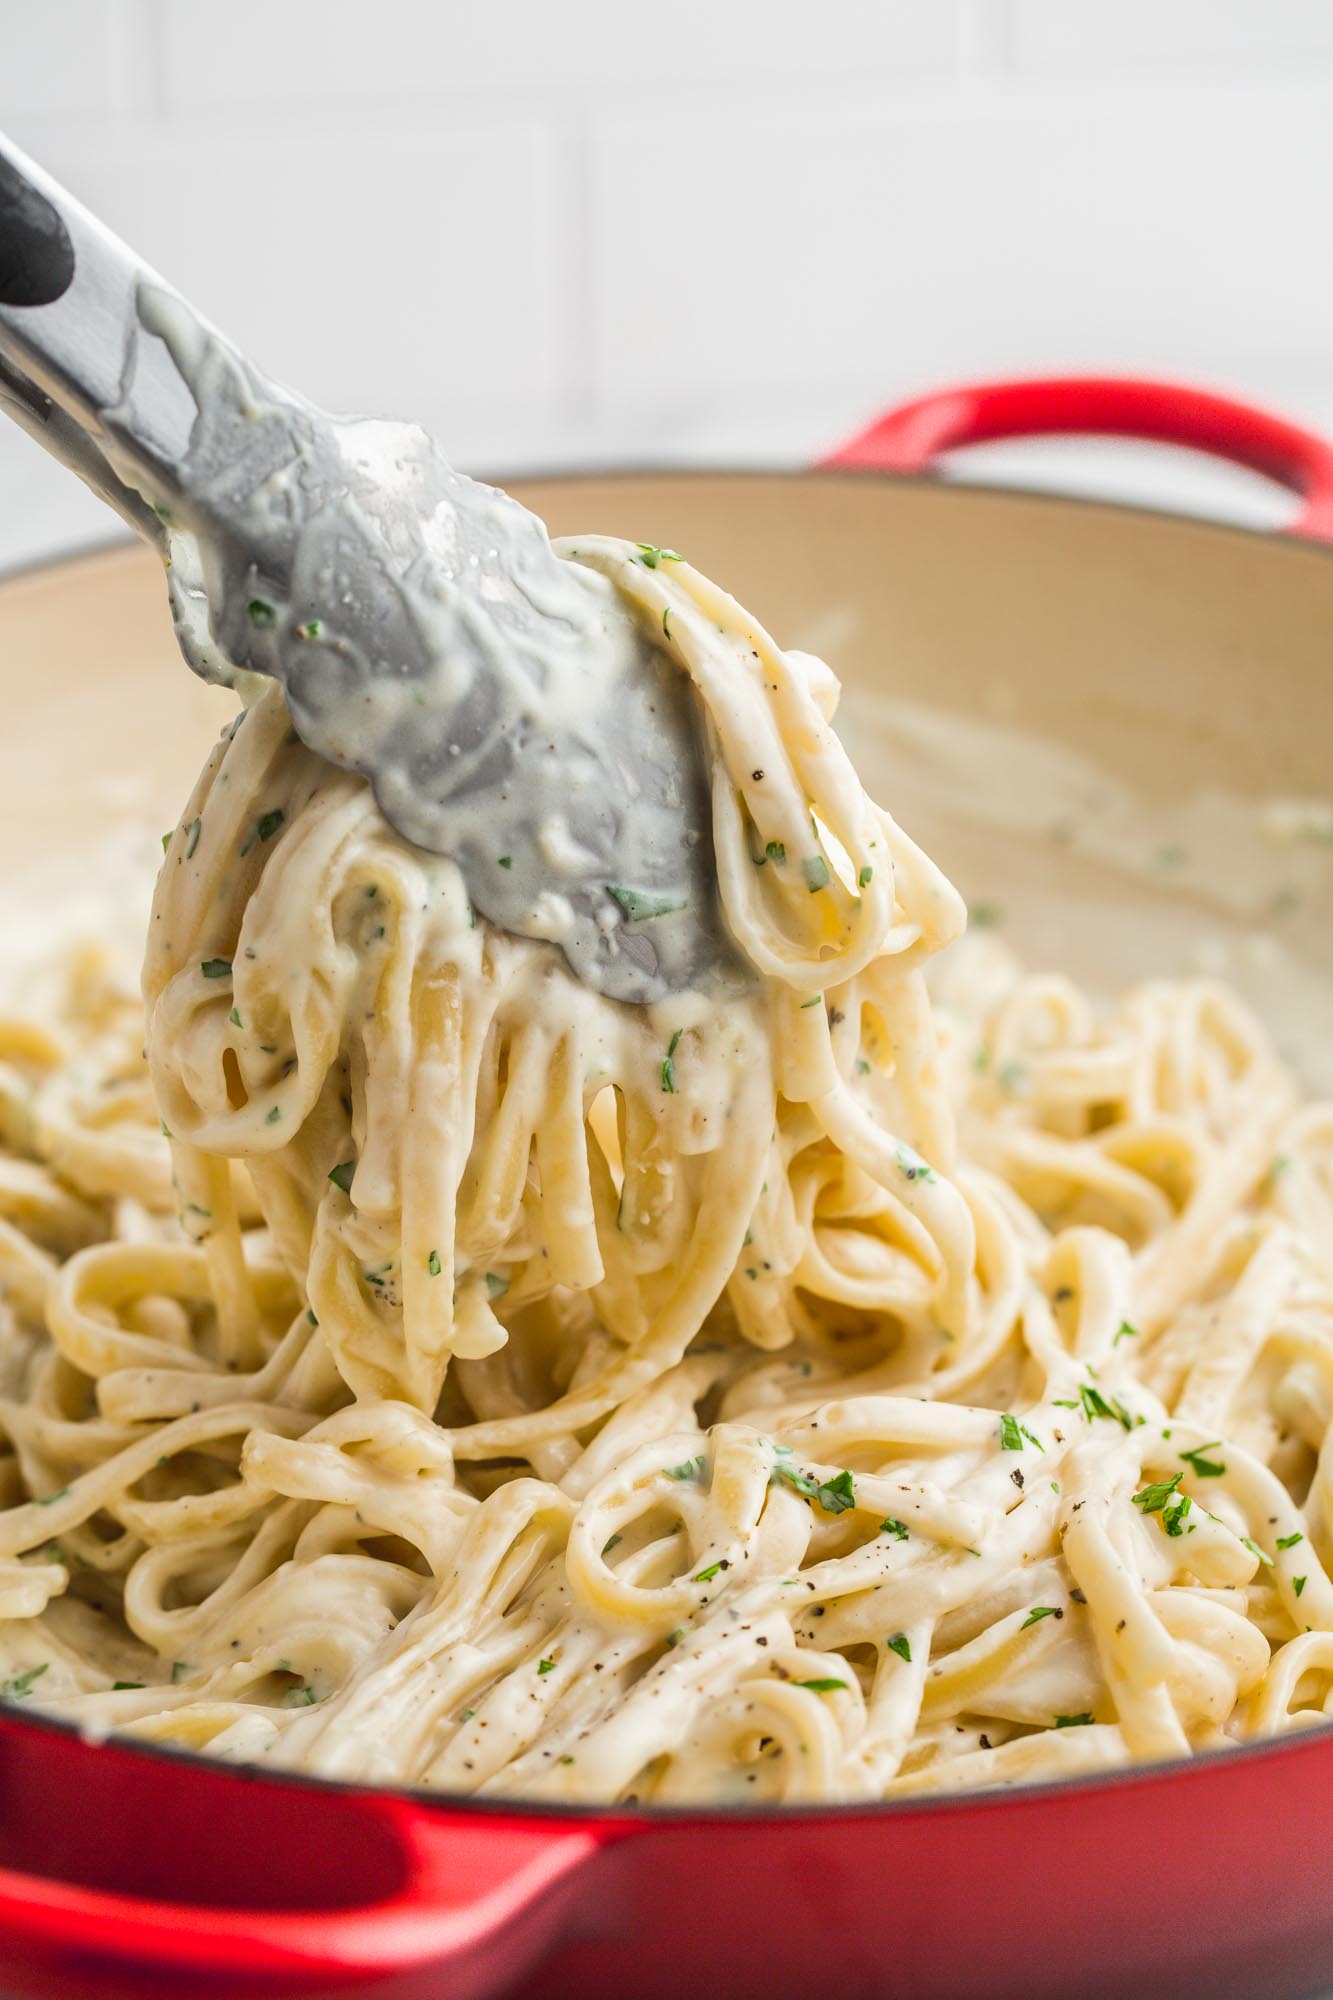 Taking a portion of super creamy Cream Cheese Pasta Sauce from the pan using kitchen tongs